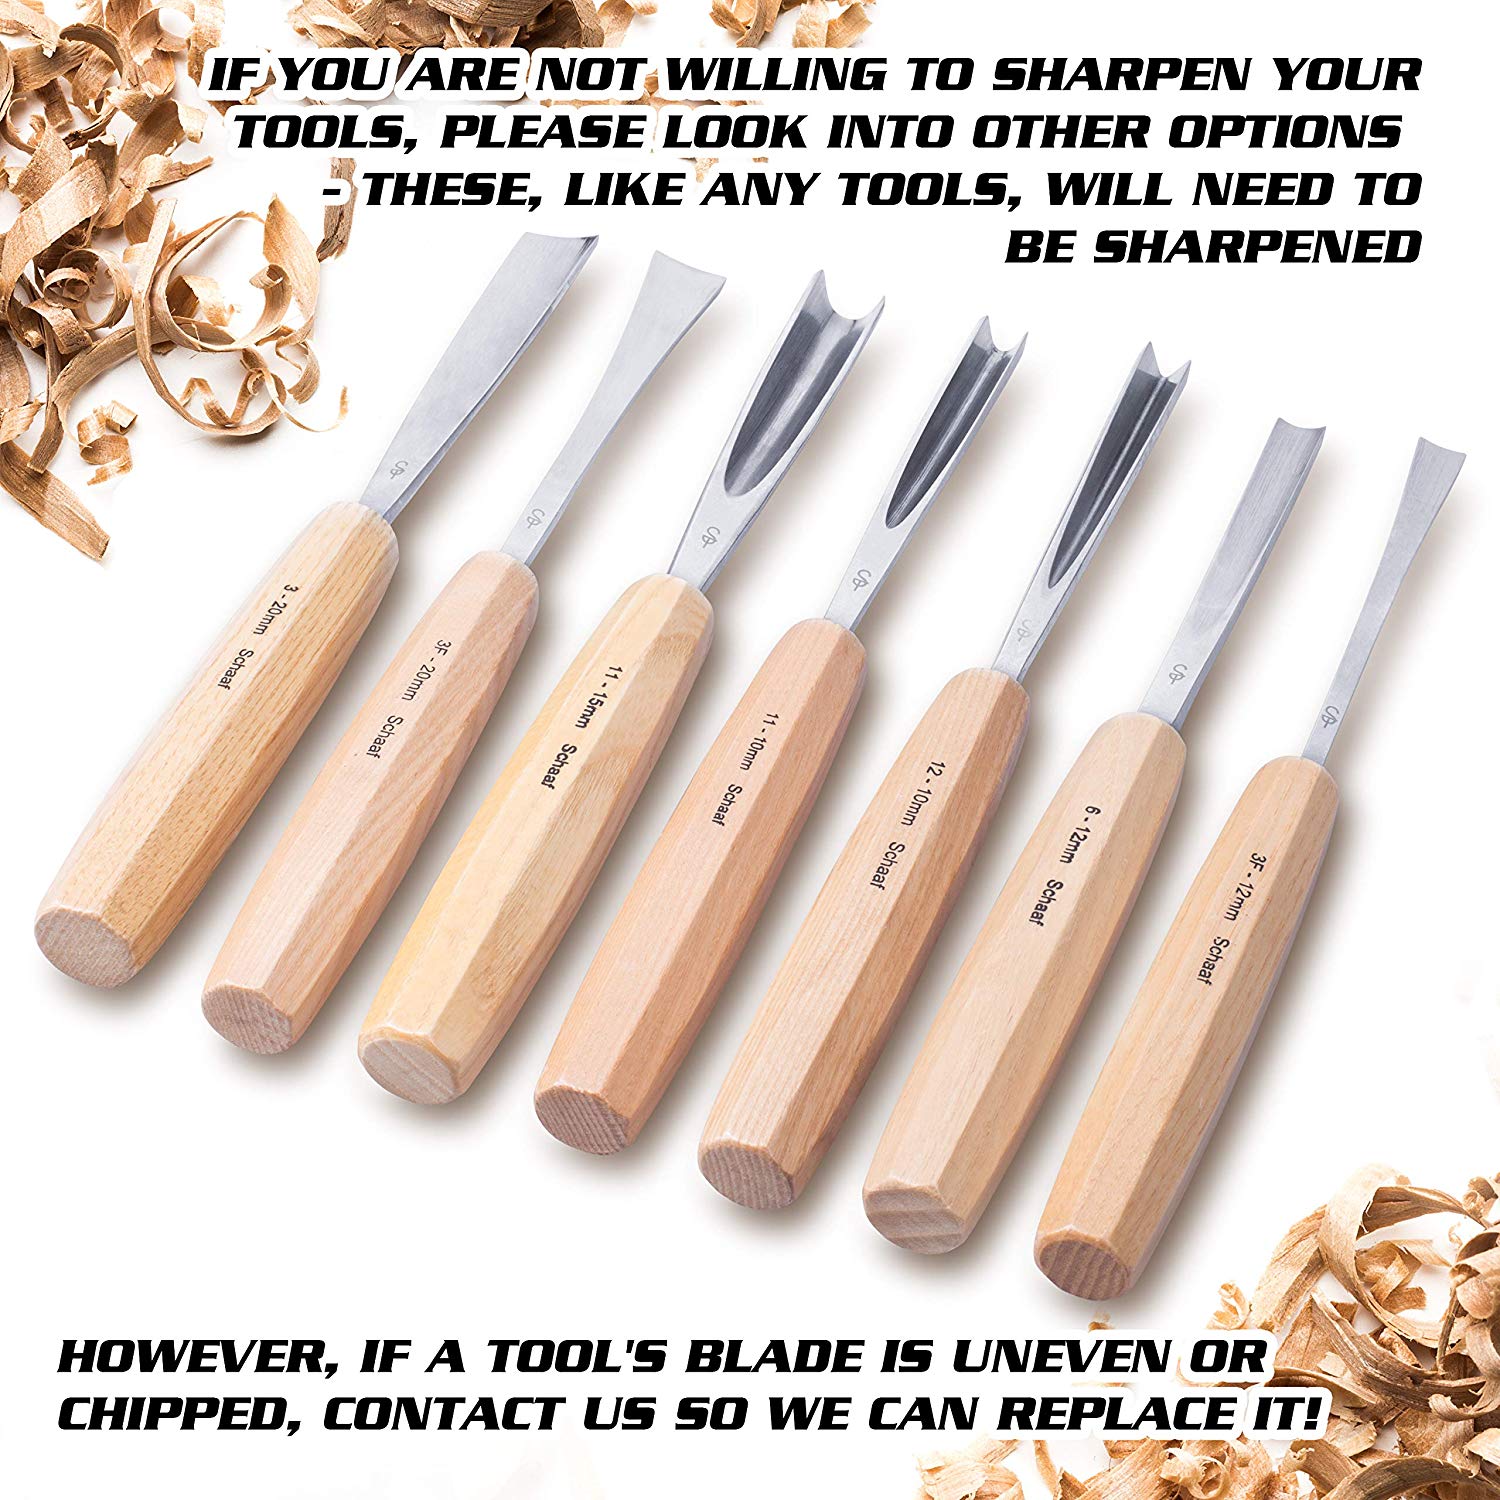 Schaaf Wood Carving Tools Set of 12 Chisels with Canvas Case